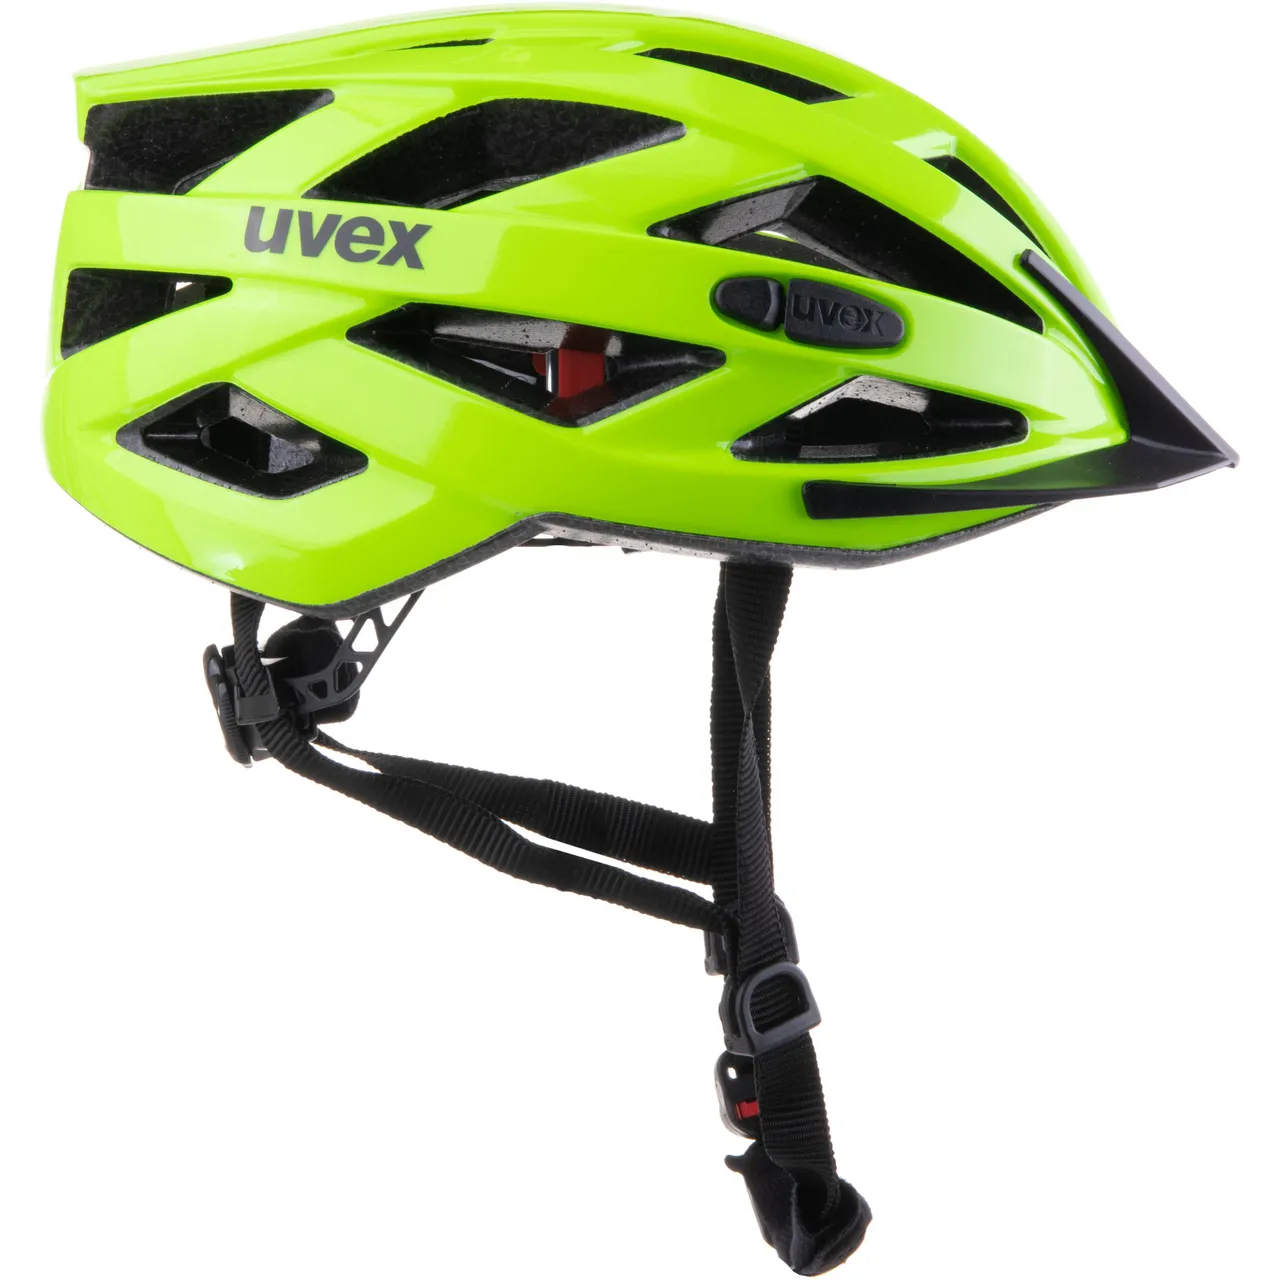 Uvex i-vo 3D Helm